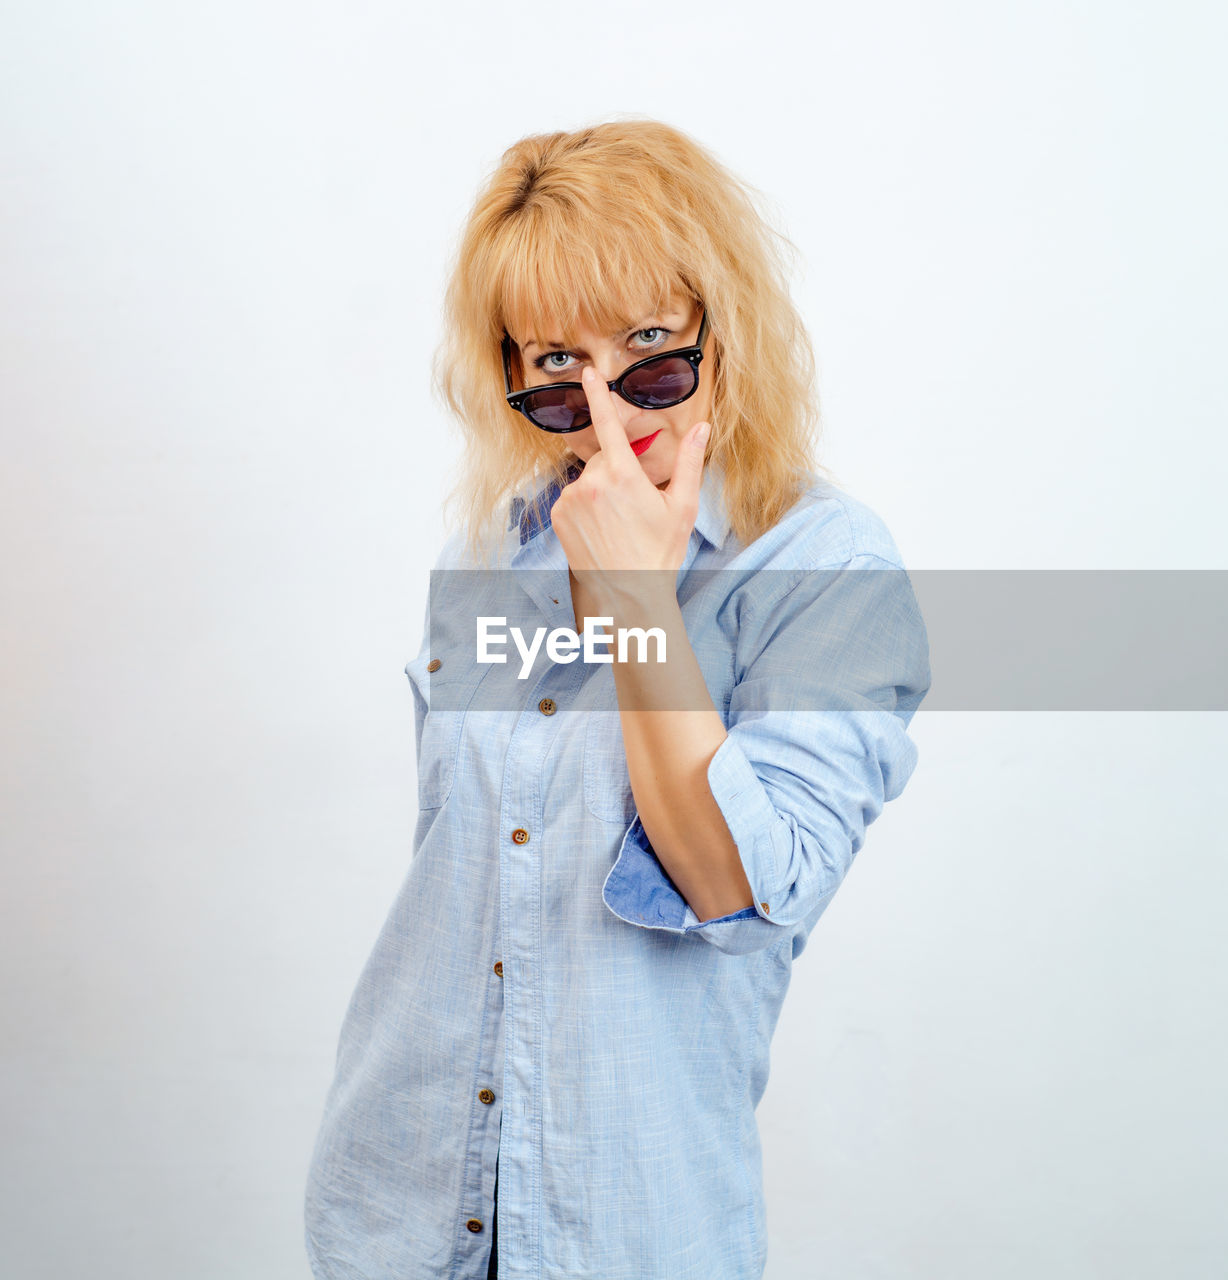 Blonde woman looks at camera through lowered glasses. female curiosity.